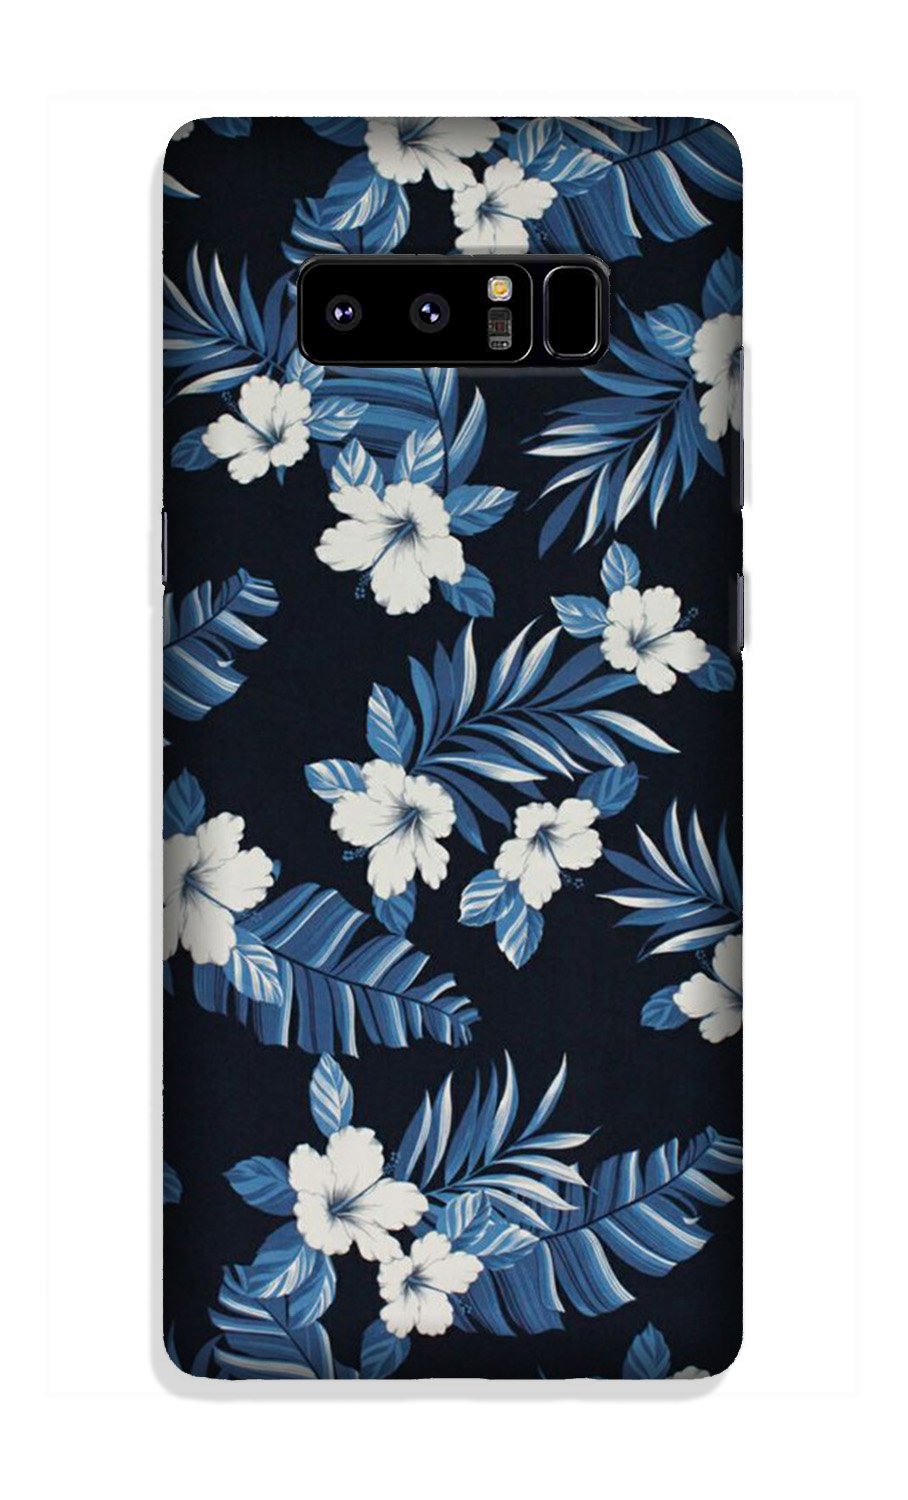 White flowers Blue Background2 Case for Galaxy Note 8